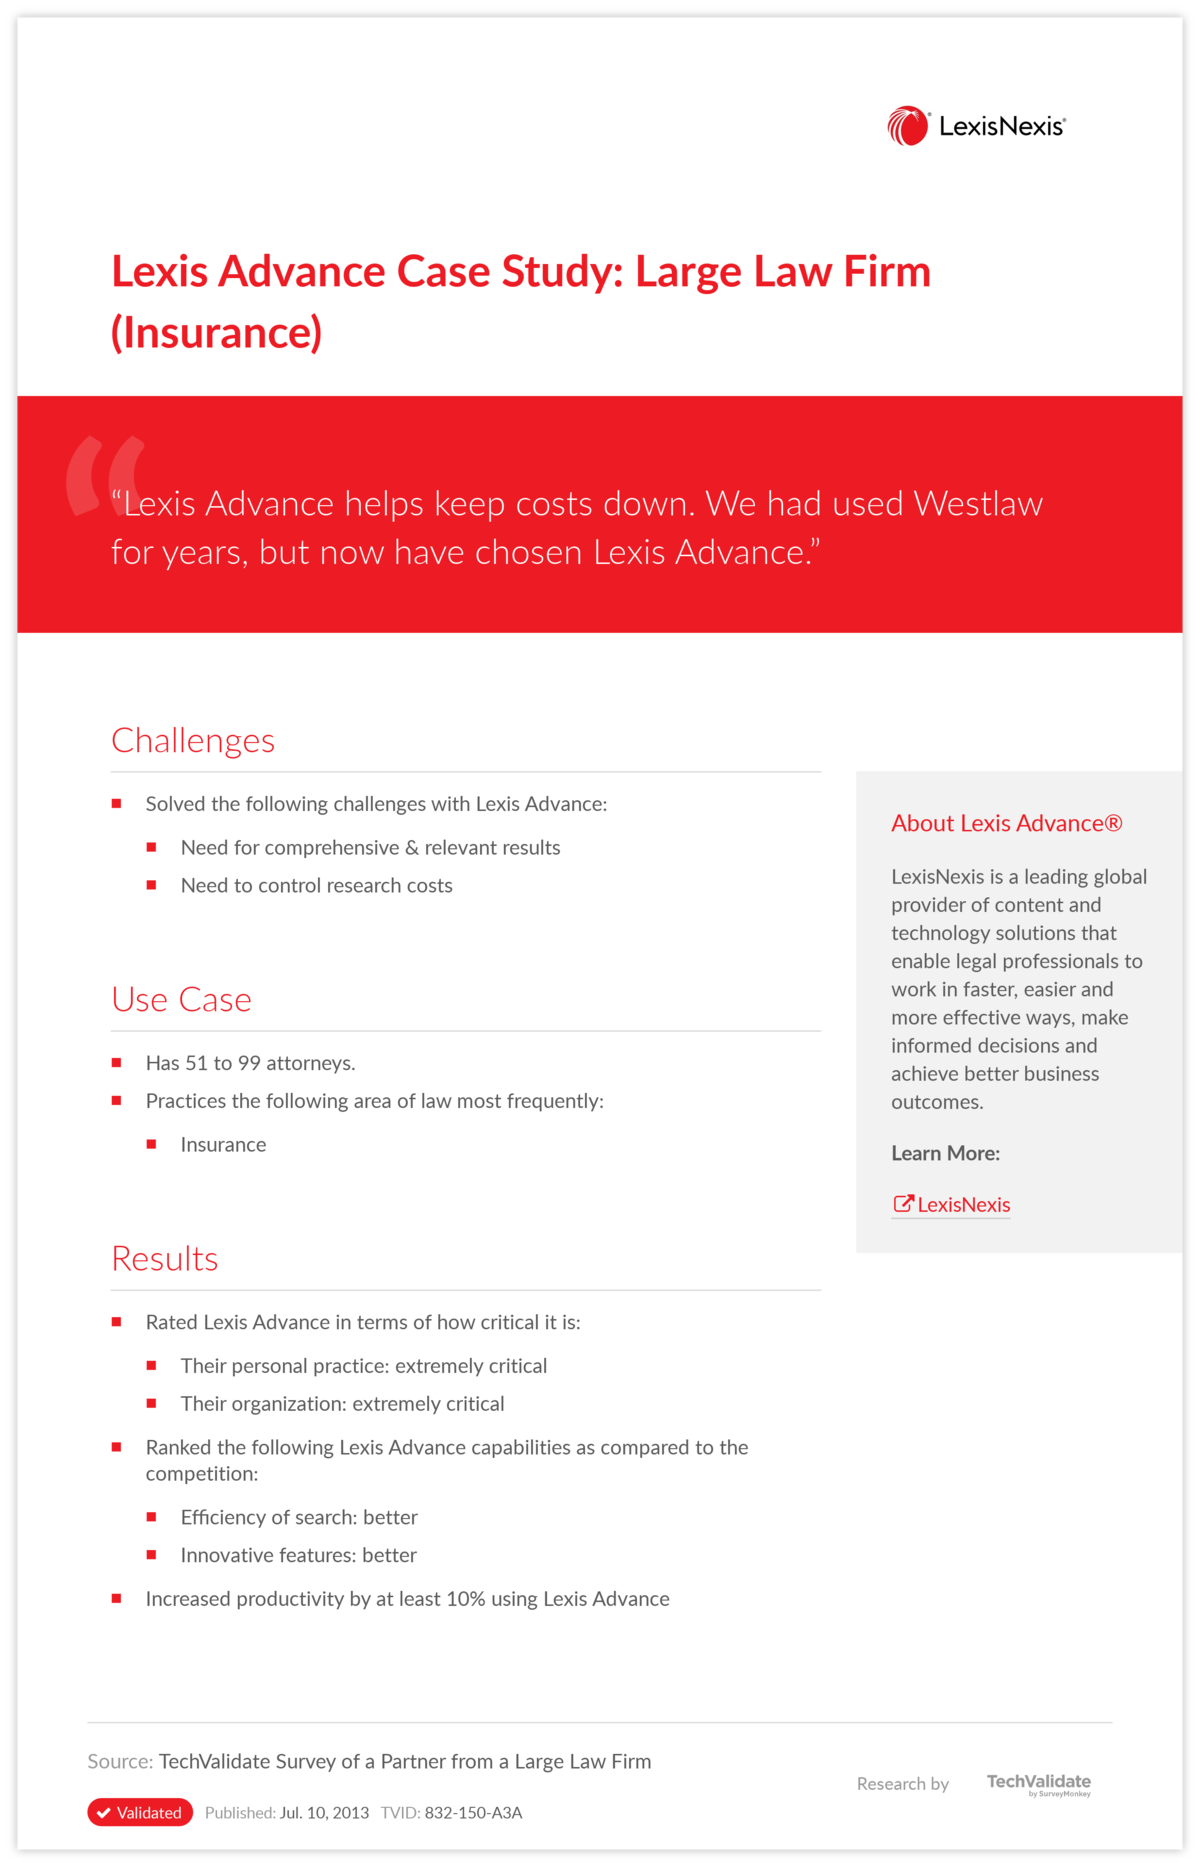 Lexis Advance Case Study: Large Law Firm (Insurance)